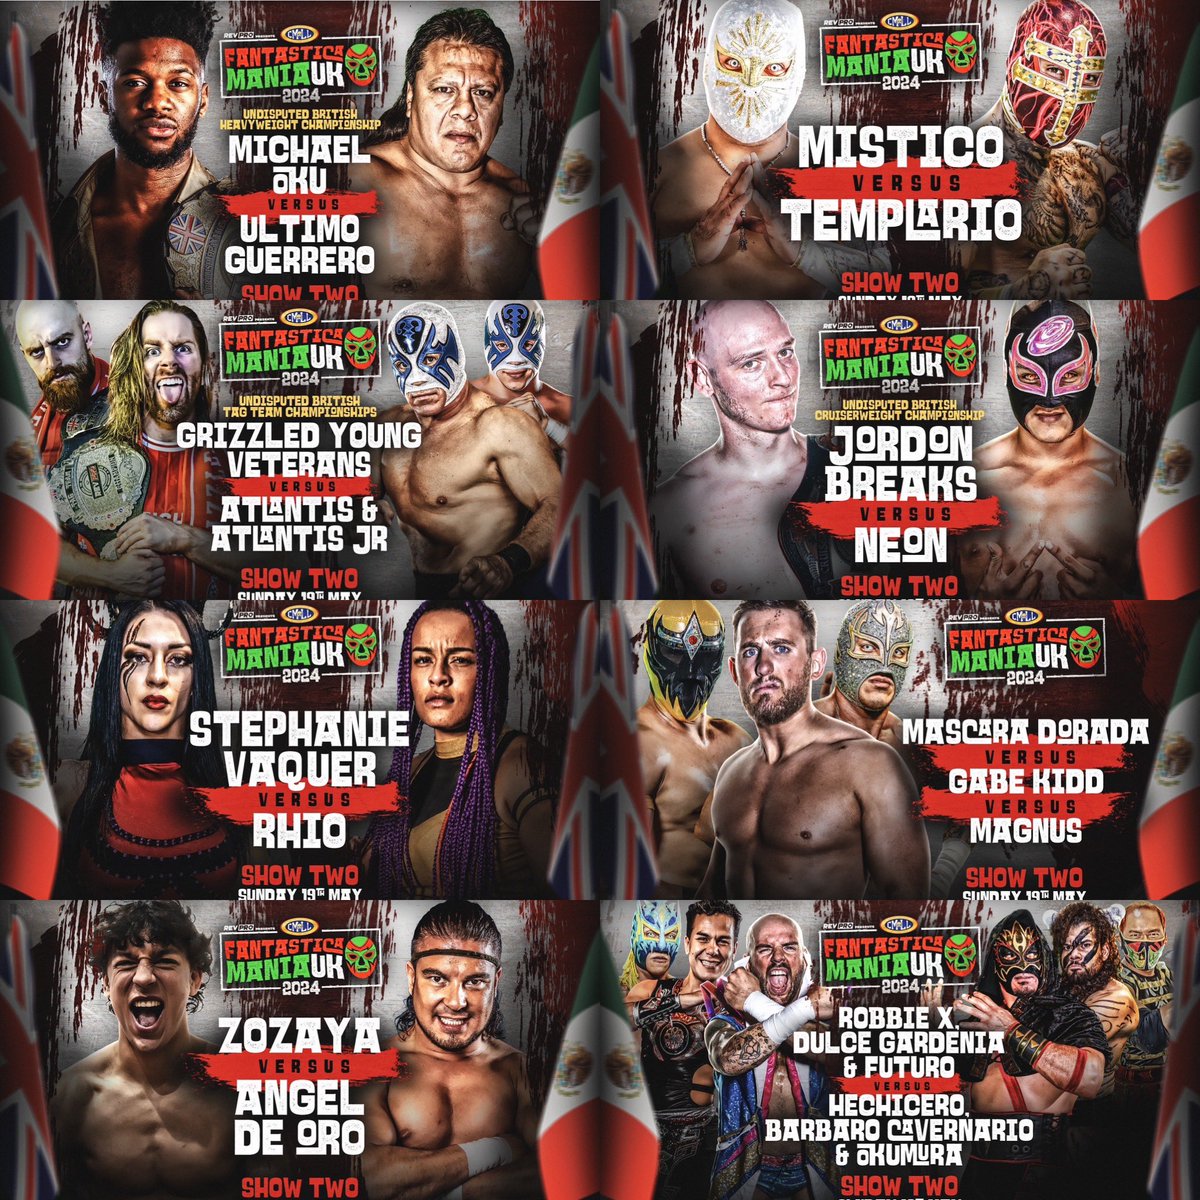 THIS SUNDAY! Live from York Hall, Bethnal Green FANTASTICA MANIA UK 2024 Show 1: Doors 12pm l Bell Time 1pm l End 4pm Show 2: Doors 5pm l Bell Time 6pm l End 9pm Tickets: revolutionprowrestling.com/fantasticamani…